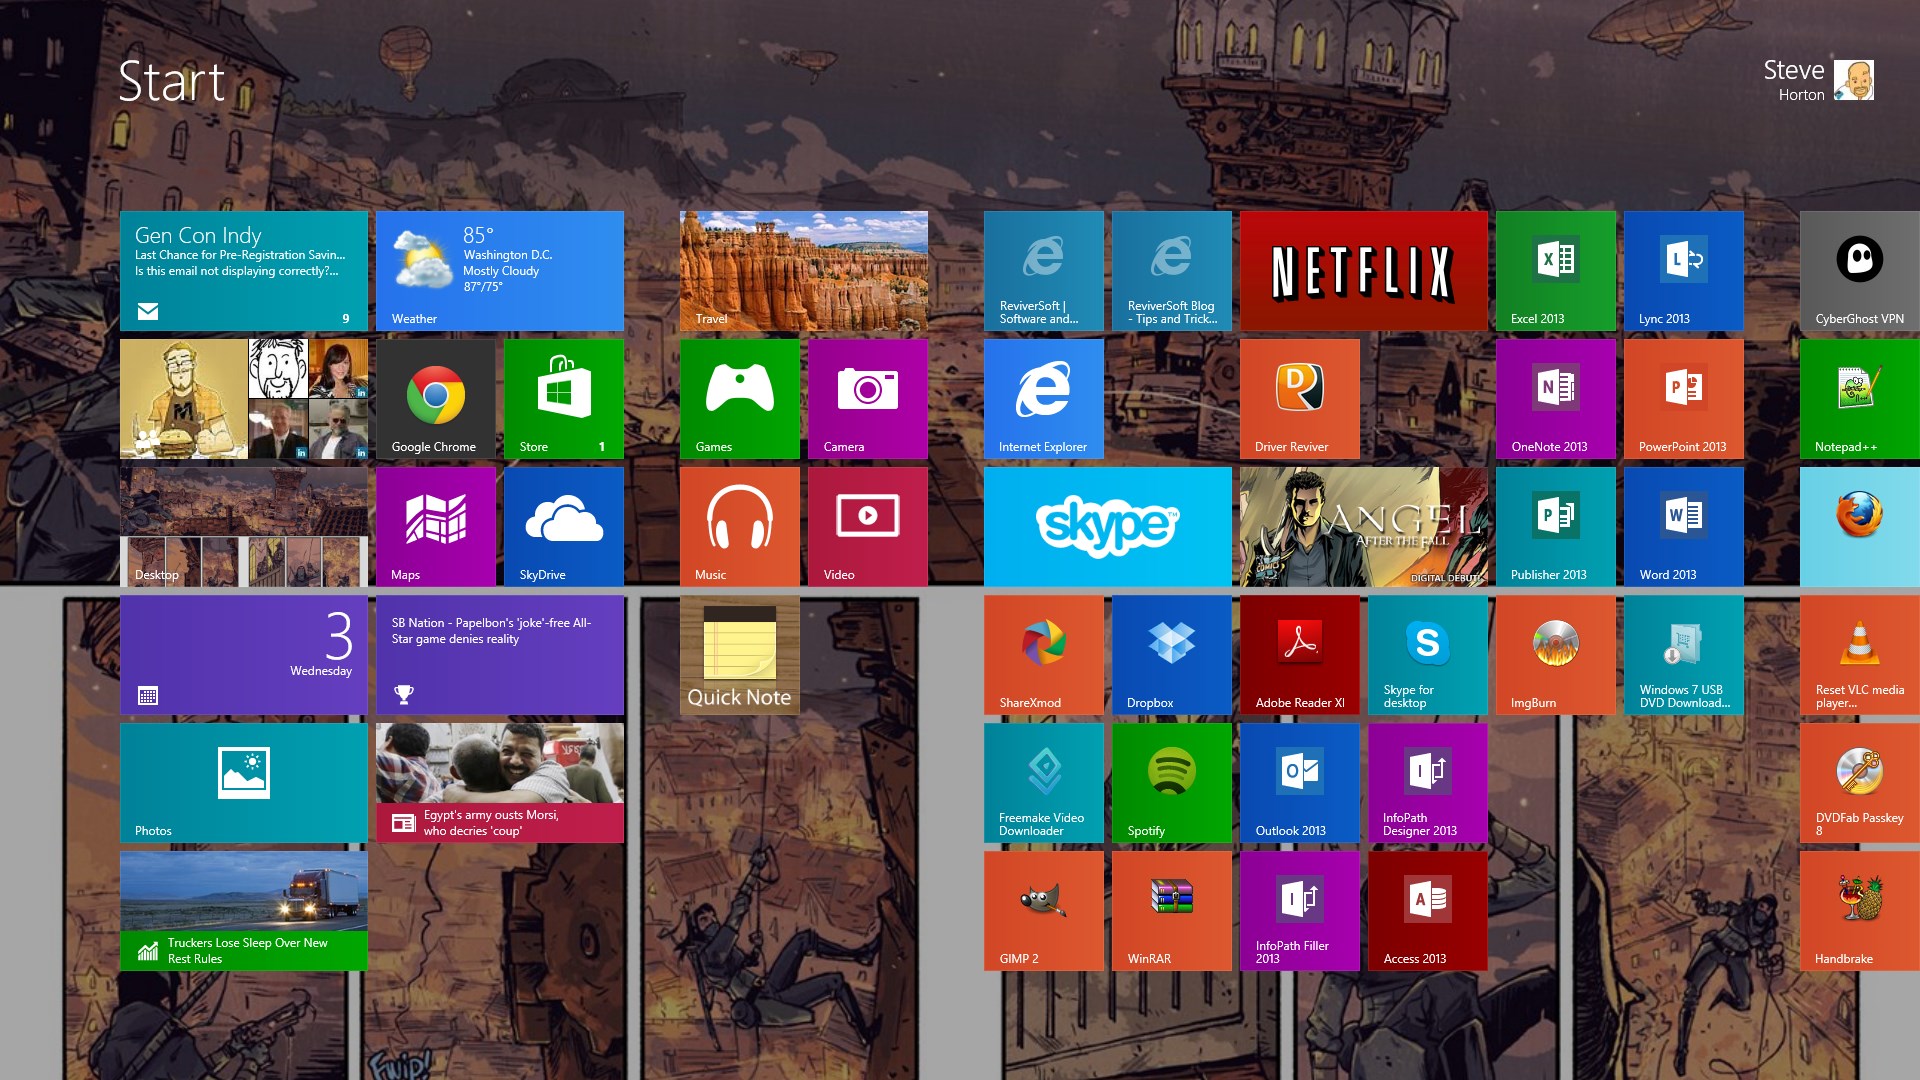 Free Download The Same Background Image On My Windows 81 Desktop And